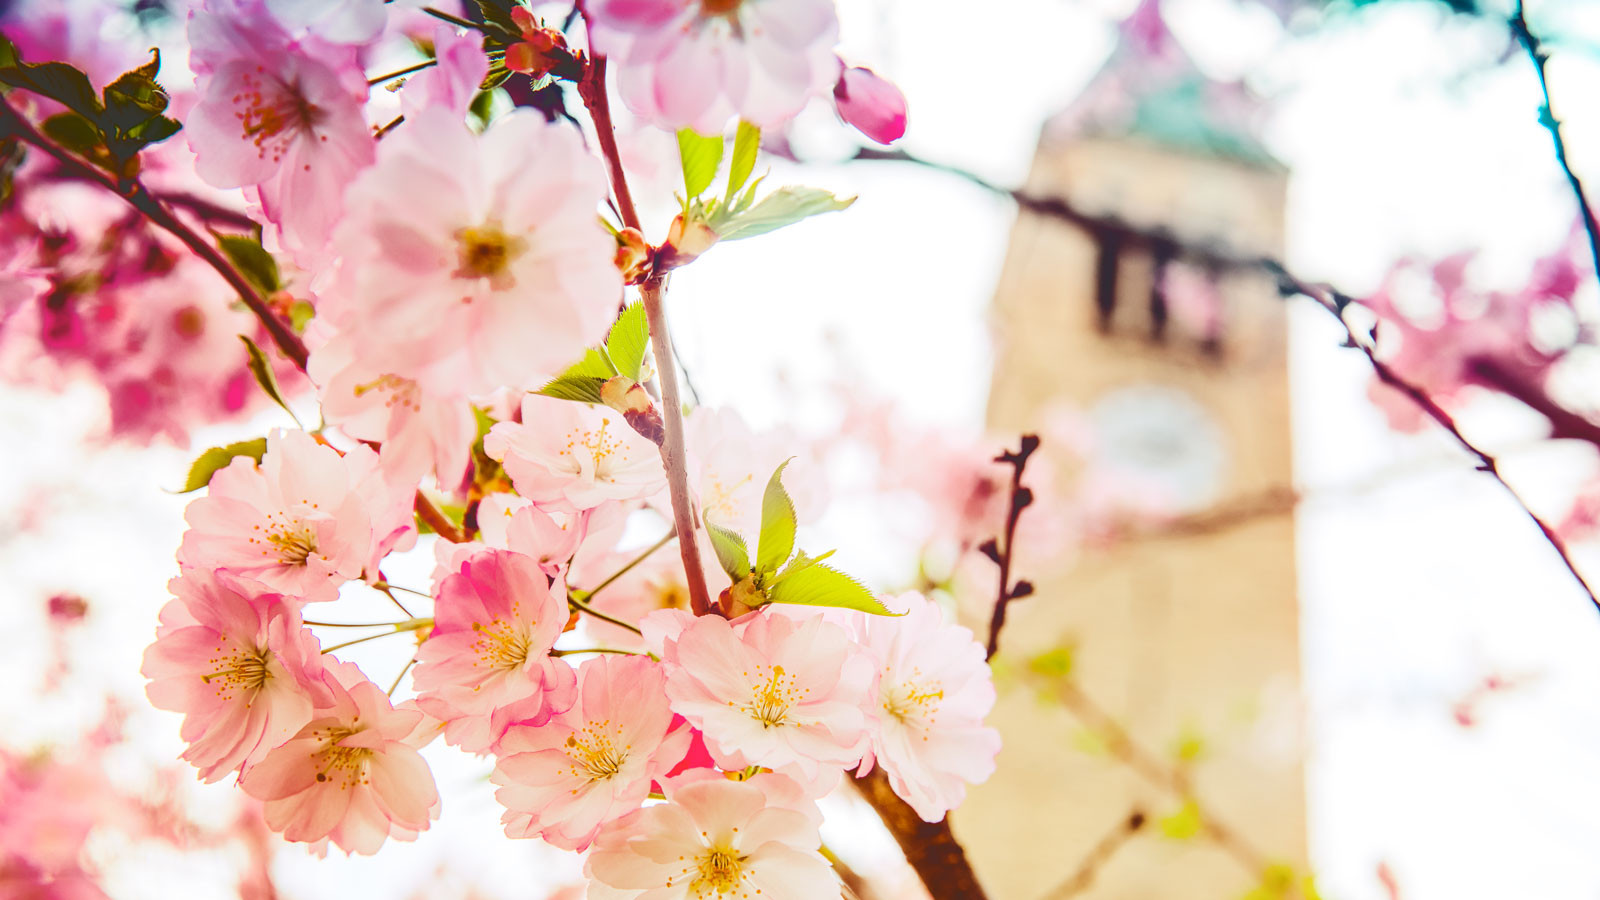 Tree blossoms with clock tower in background